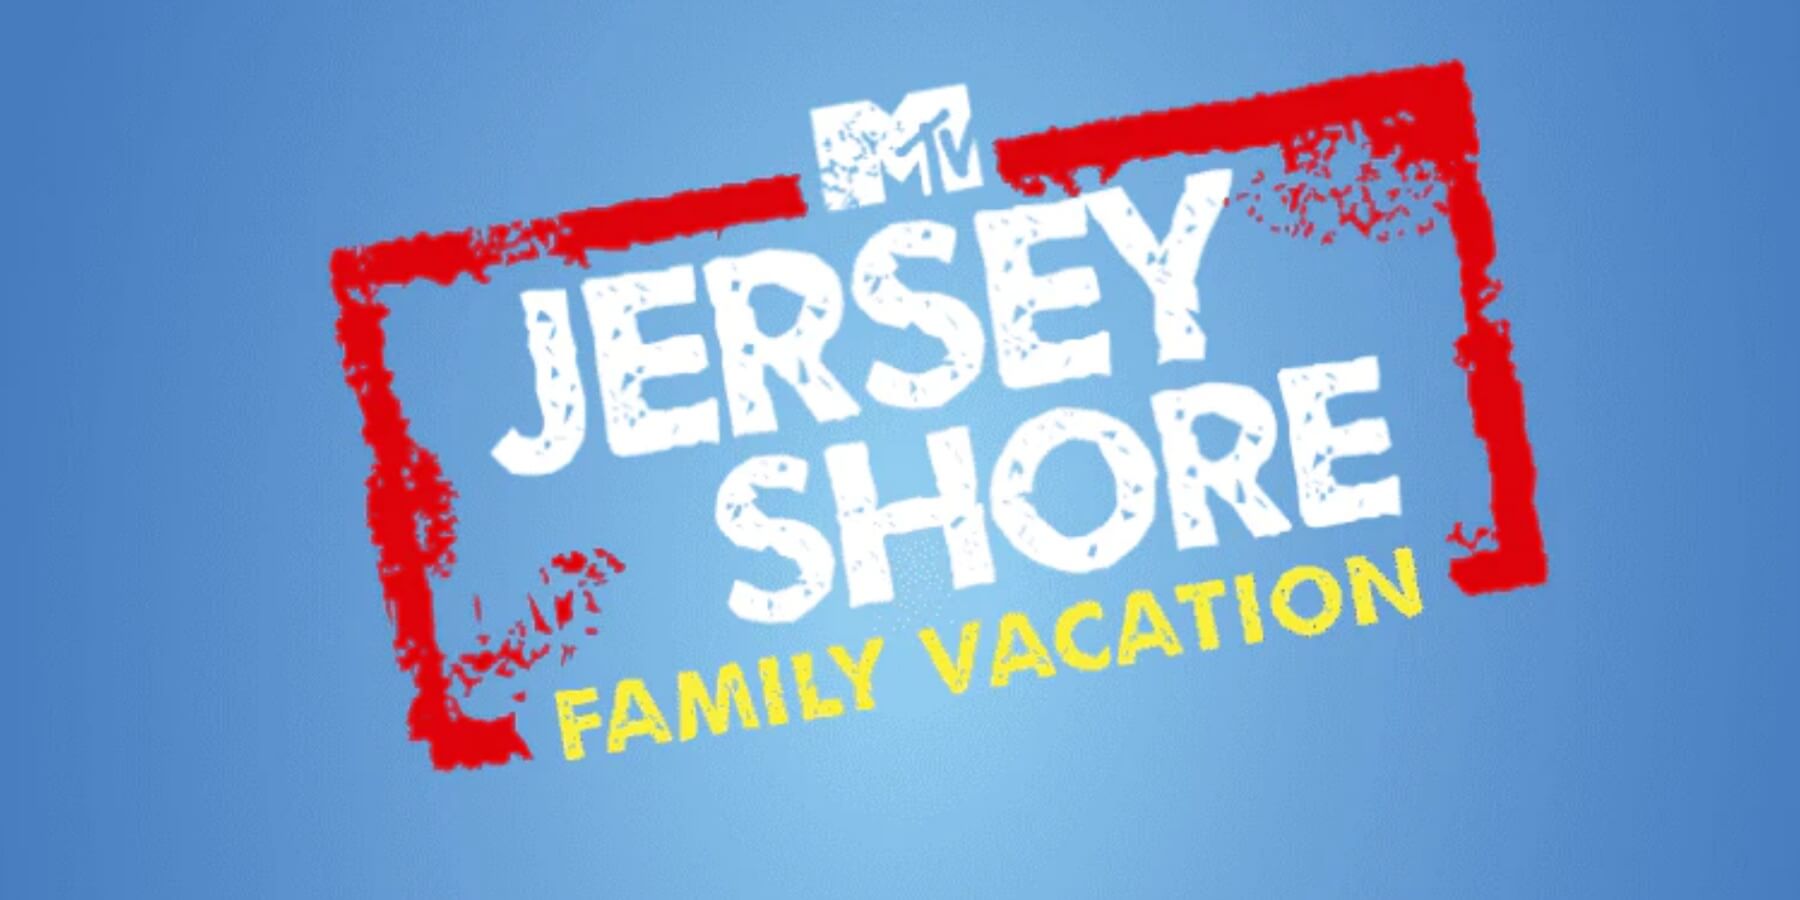 A former girlfriend of a 'Jersey Shore' star spills details of her time on the MTV series